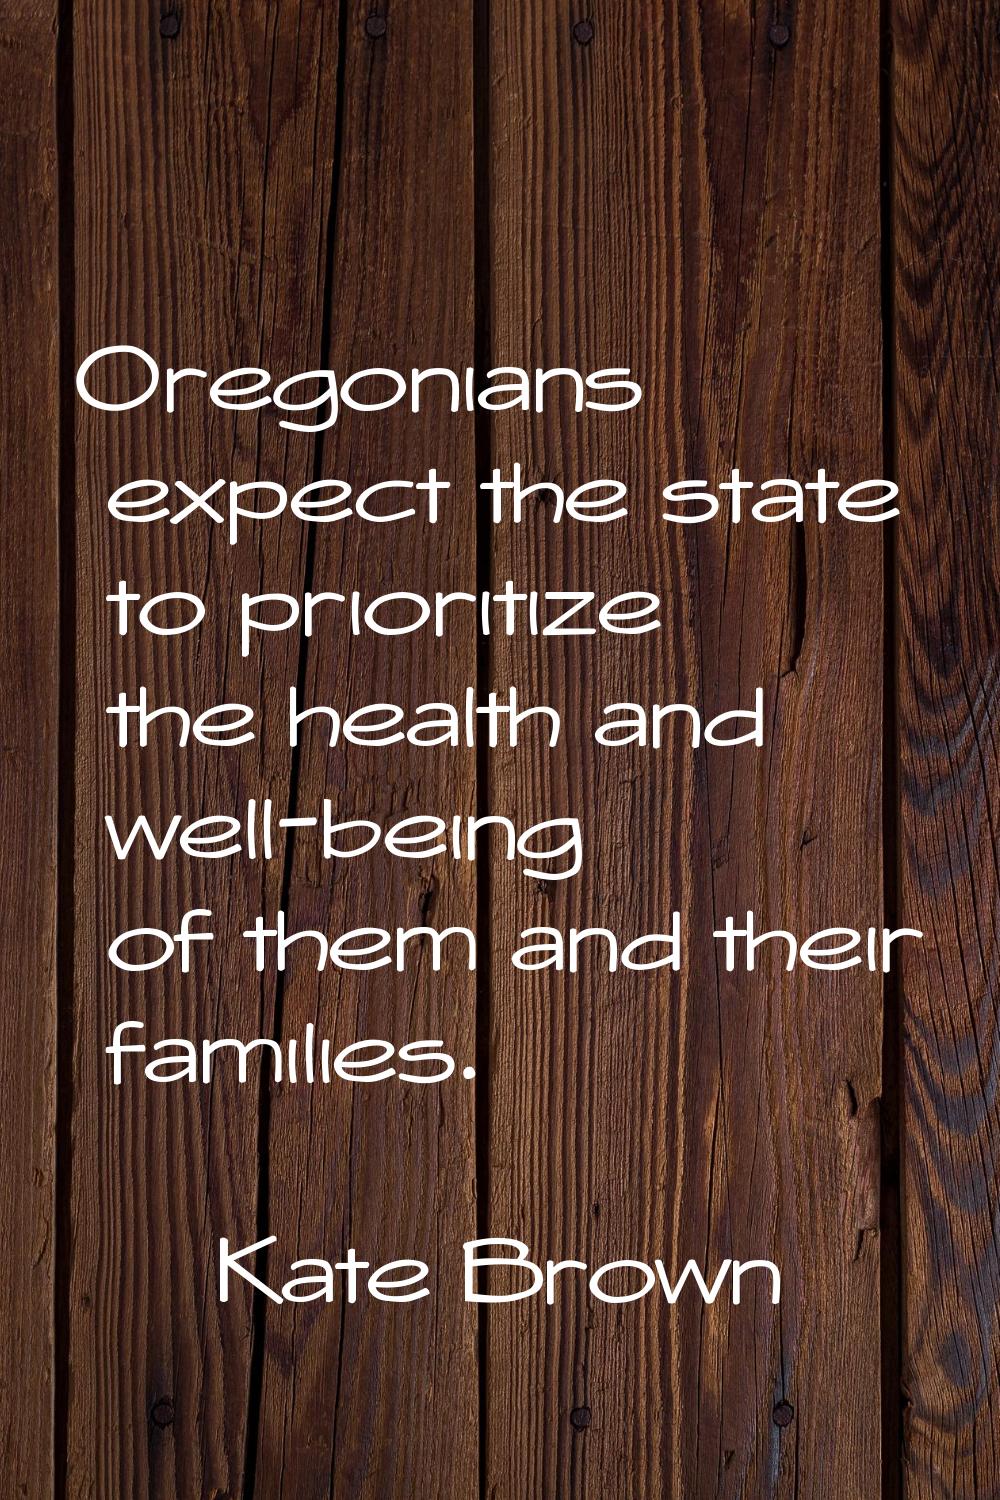 Oregonians expect the state to prioritize the health and well-being of them and their families.